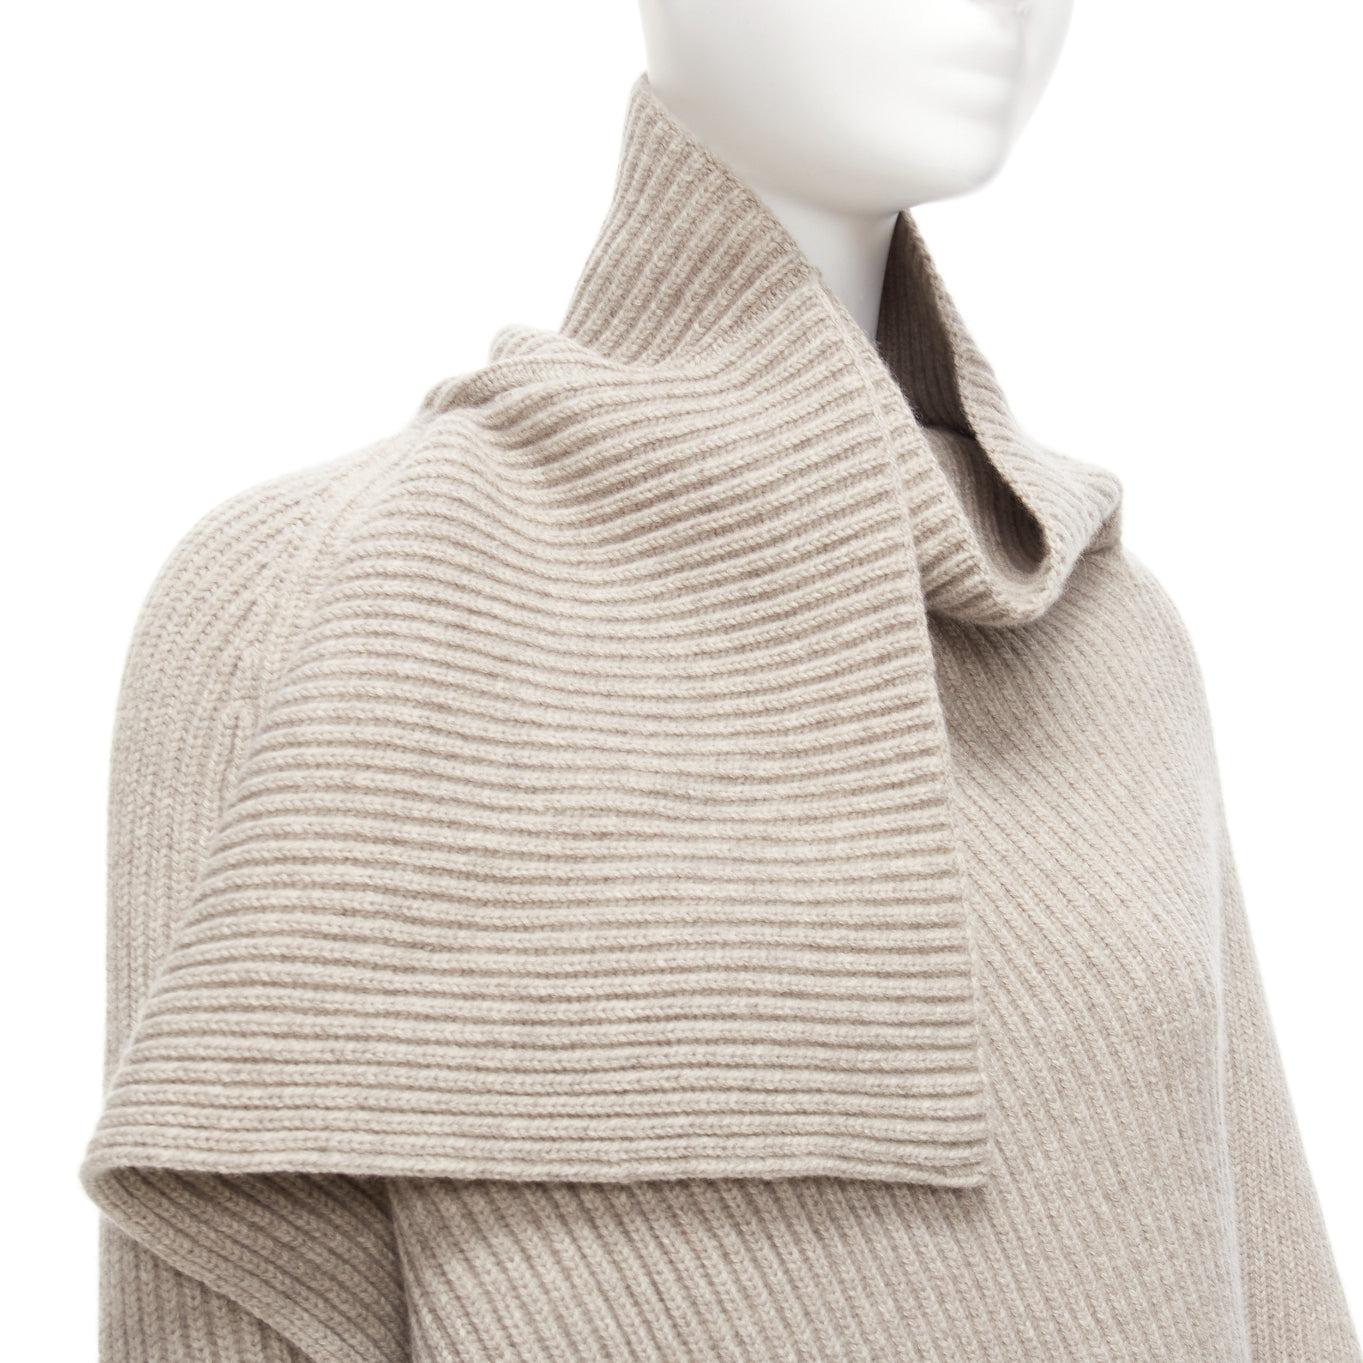 OLD CELINE Phoebe Philo stone wool cashmere draped neck open back sweater XS For Sale 3